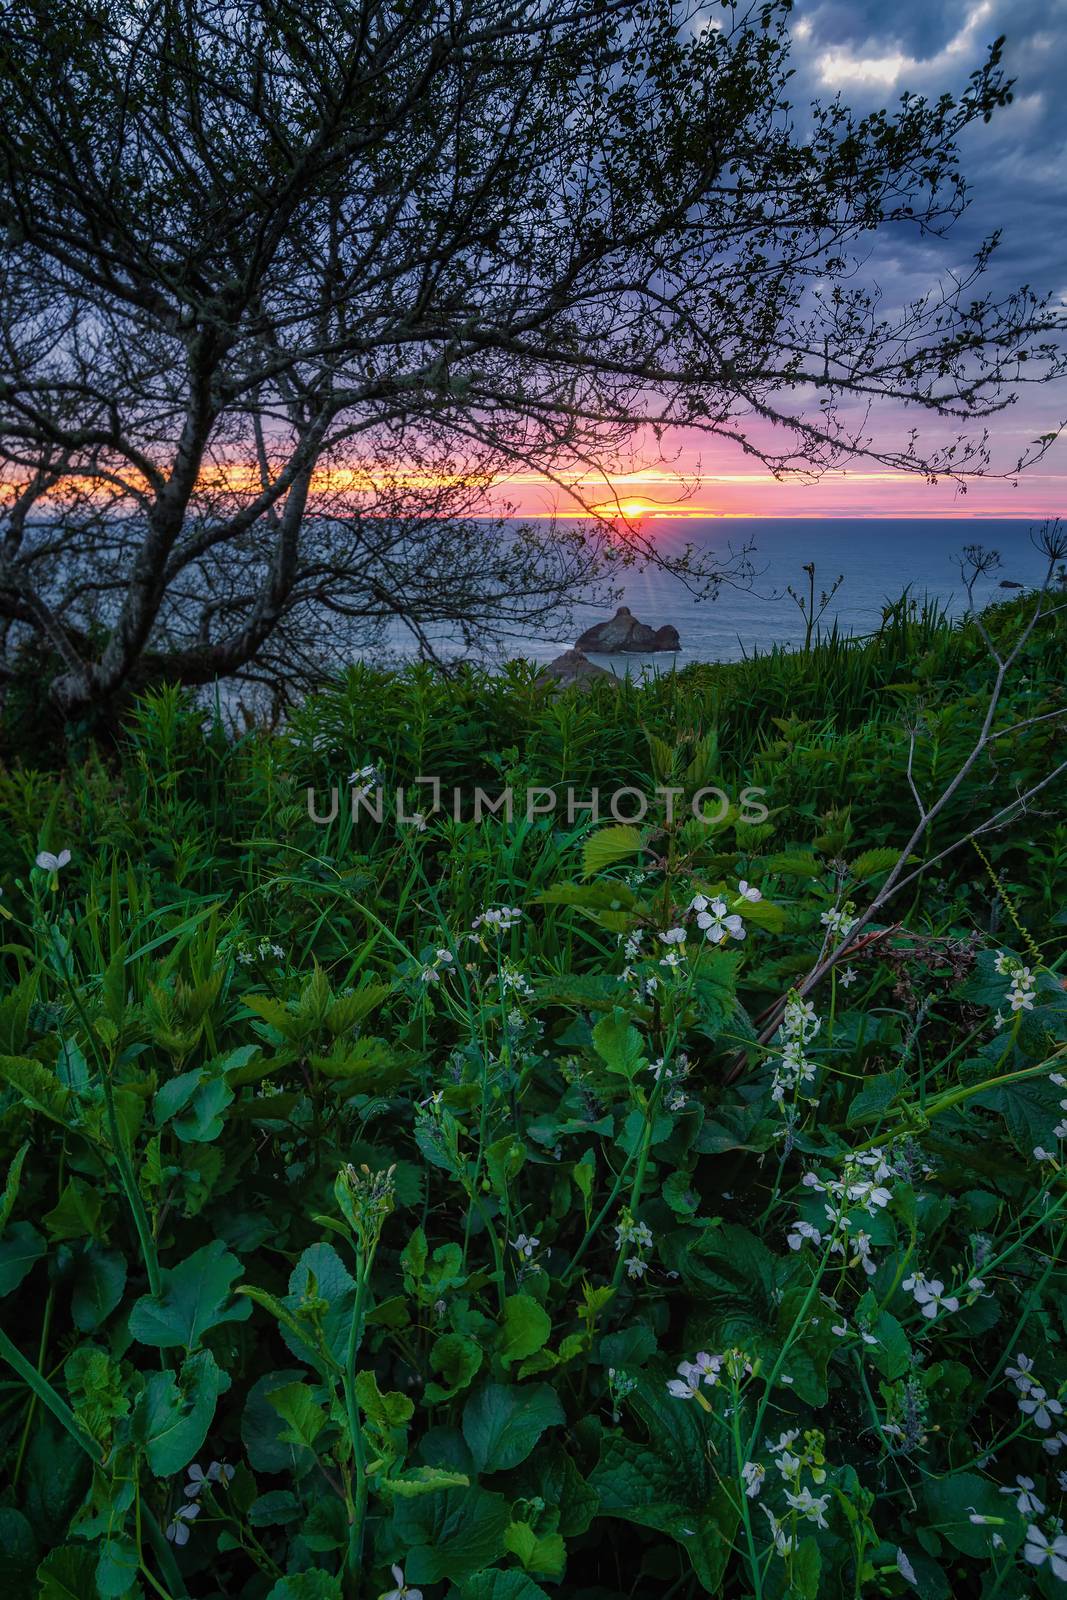 Landscape color image of a beautiful Pacific Northewest sunset with wildflowers in the foreground.